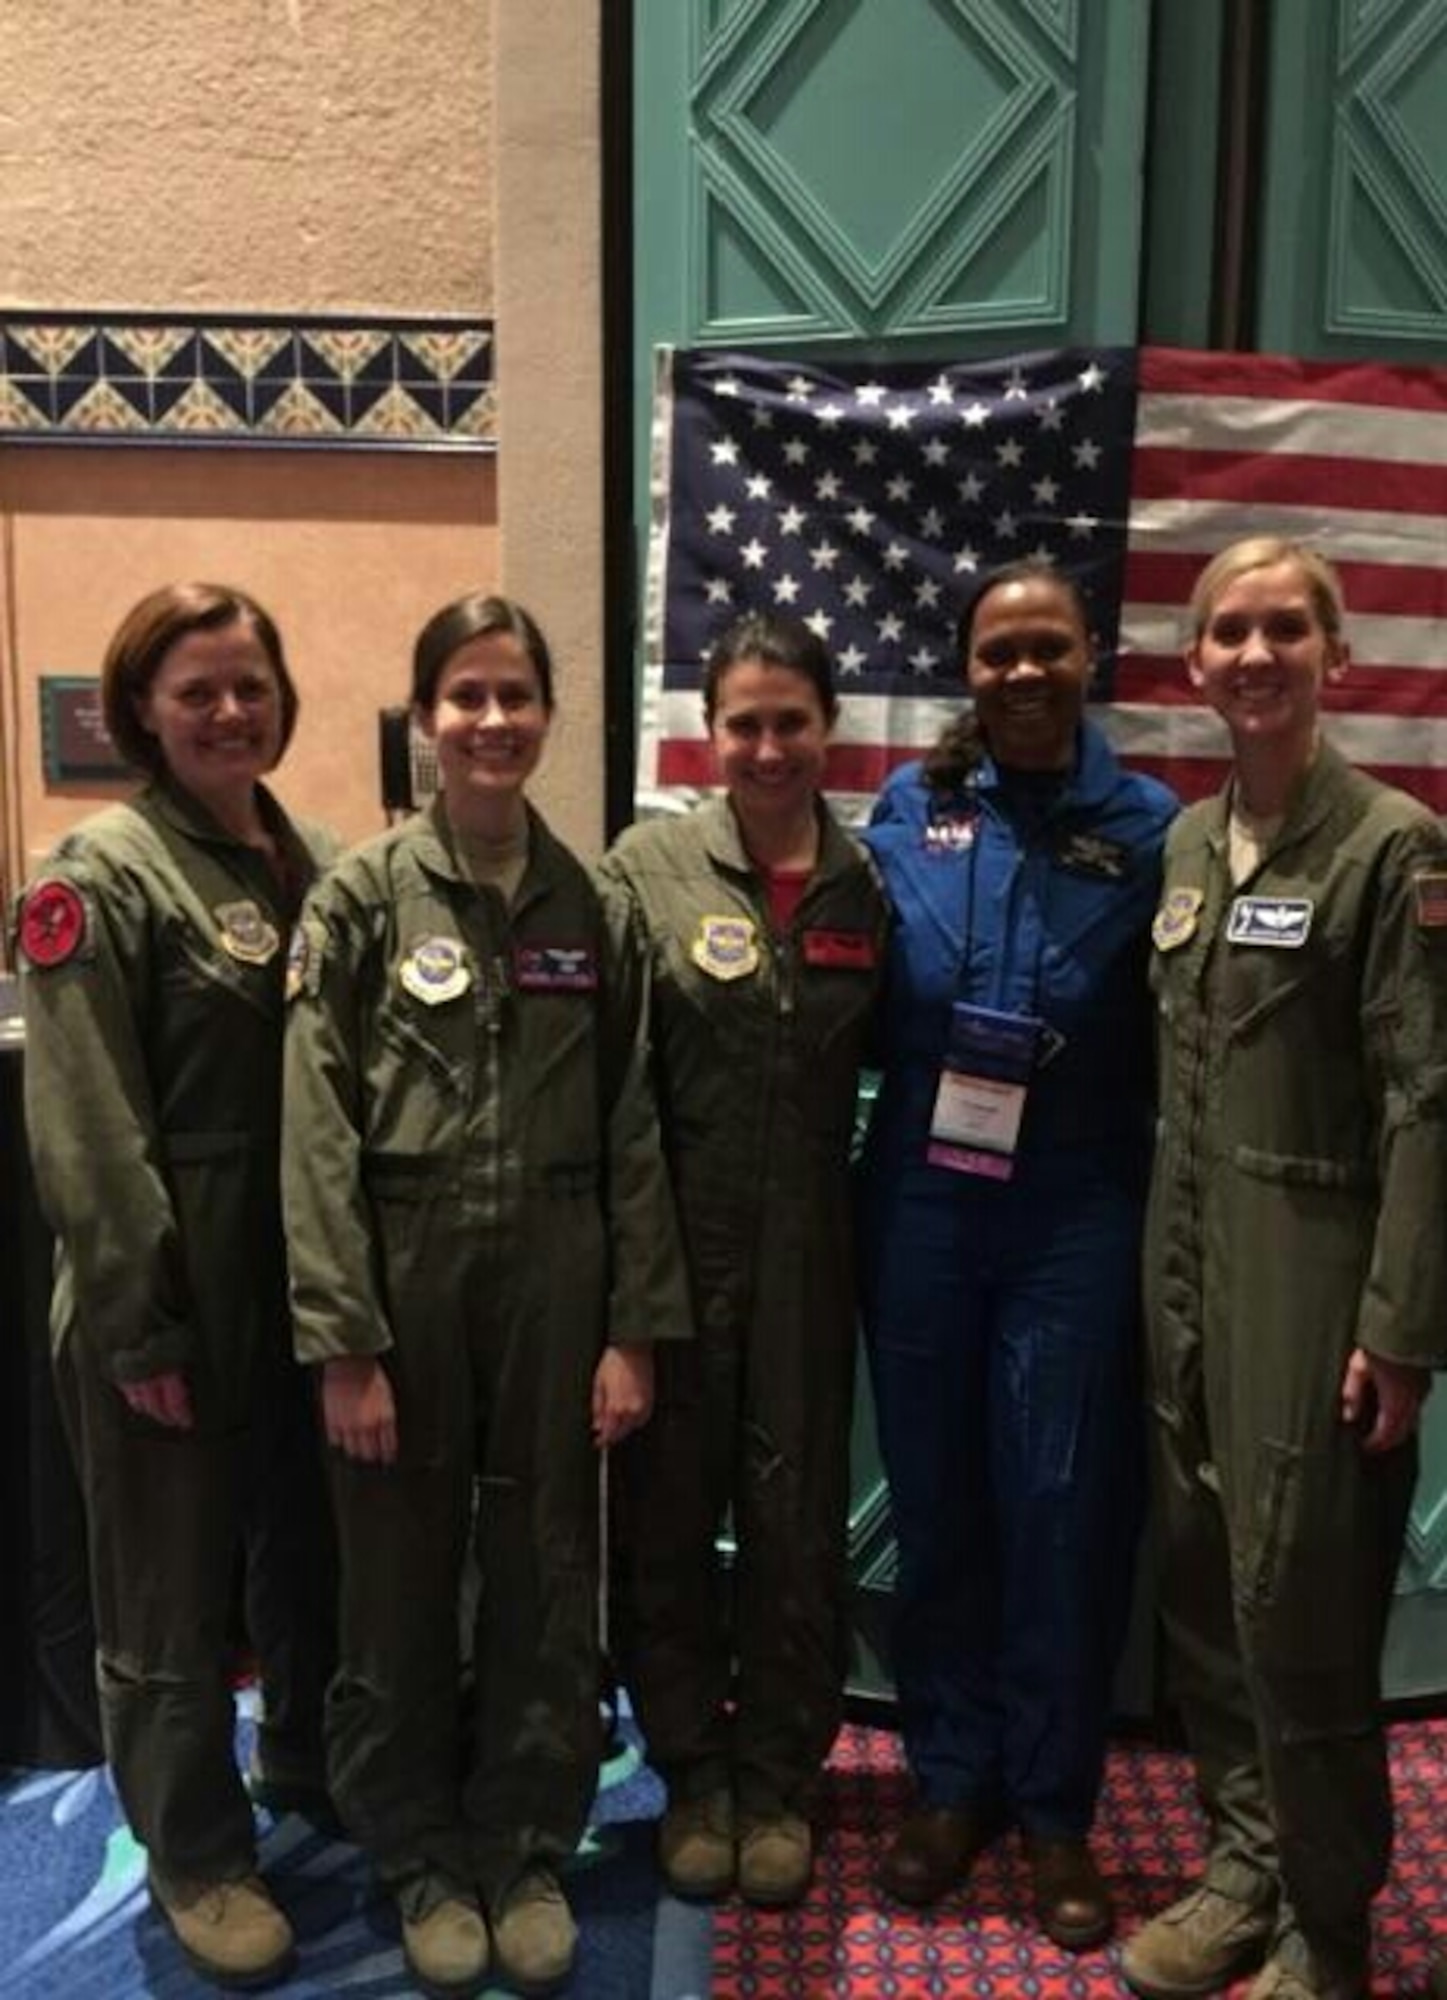 Members of Team McConnell pose for a photo with retired Col. Yvonne Cagle, astronaut, March 3, 2017 in Orlando, Fla. Cagle is currently working for NASA as a flight surgeon. (U.S. Air Force photo/2nd Lt. Carla Stefaniak)